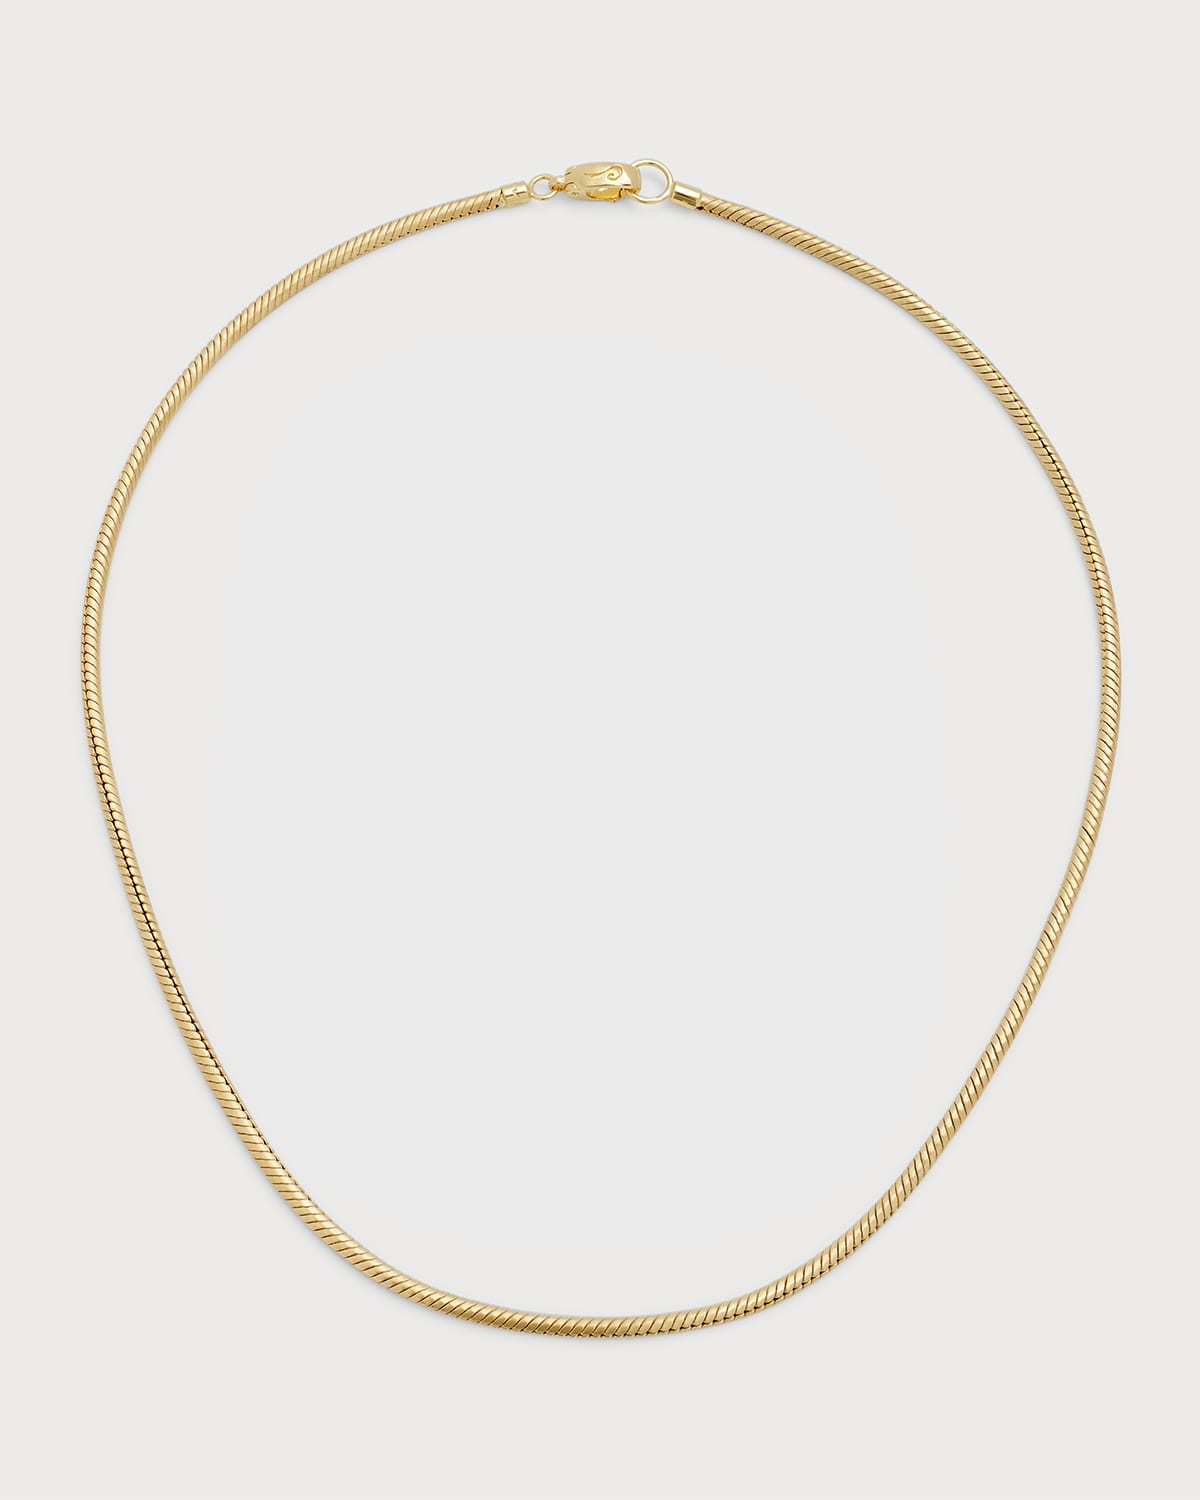 Marco Dal Maso Men's 18k Yellow Gold Chain Necklace